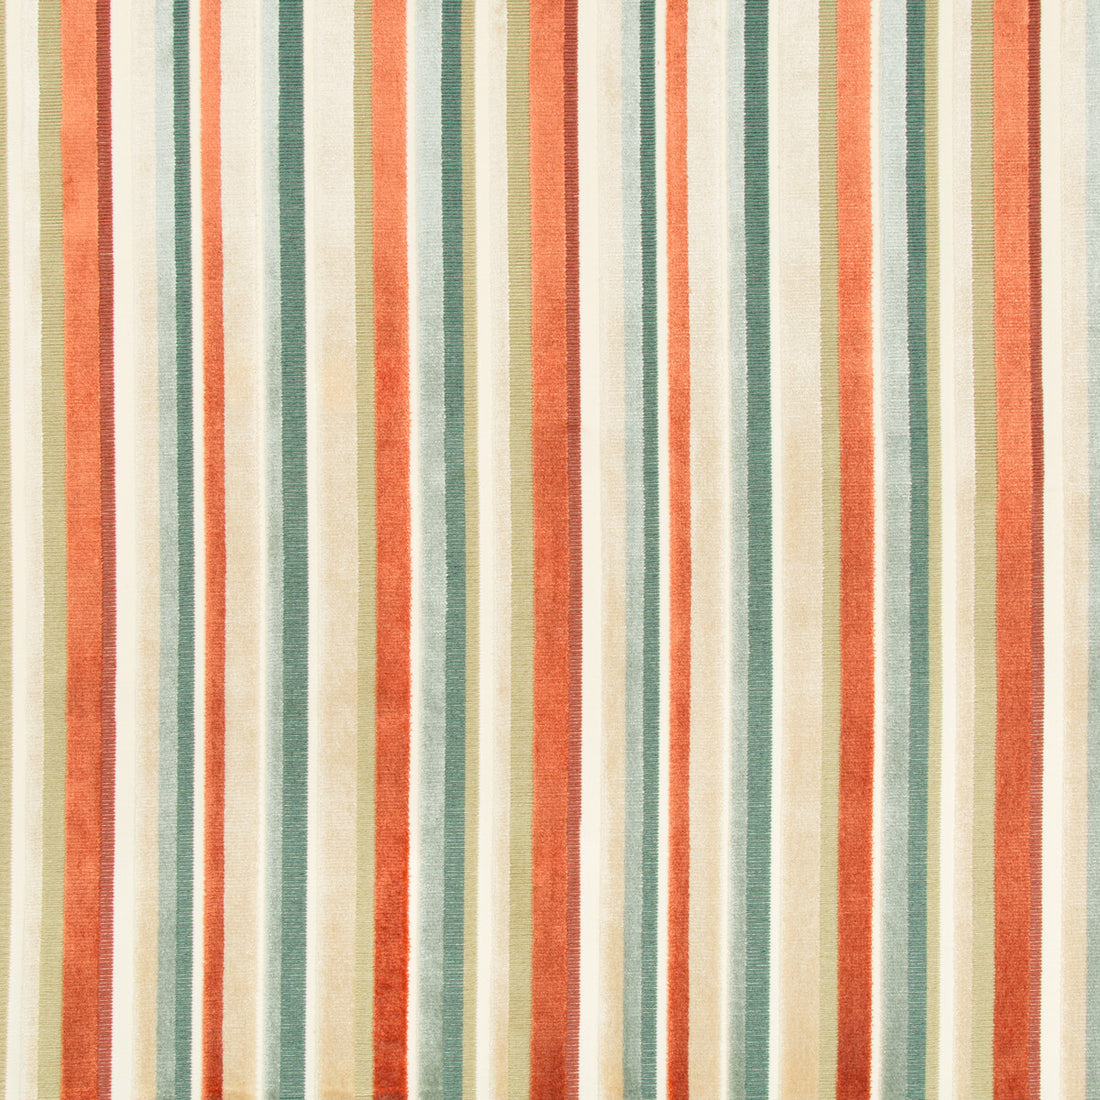 Bodenham fabric in apricot color - pattern 35302.24.0 - by Kravet Basics in the Greenwich collection